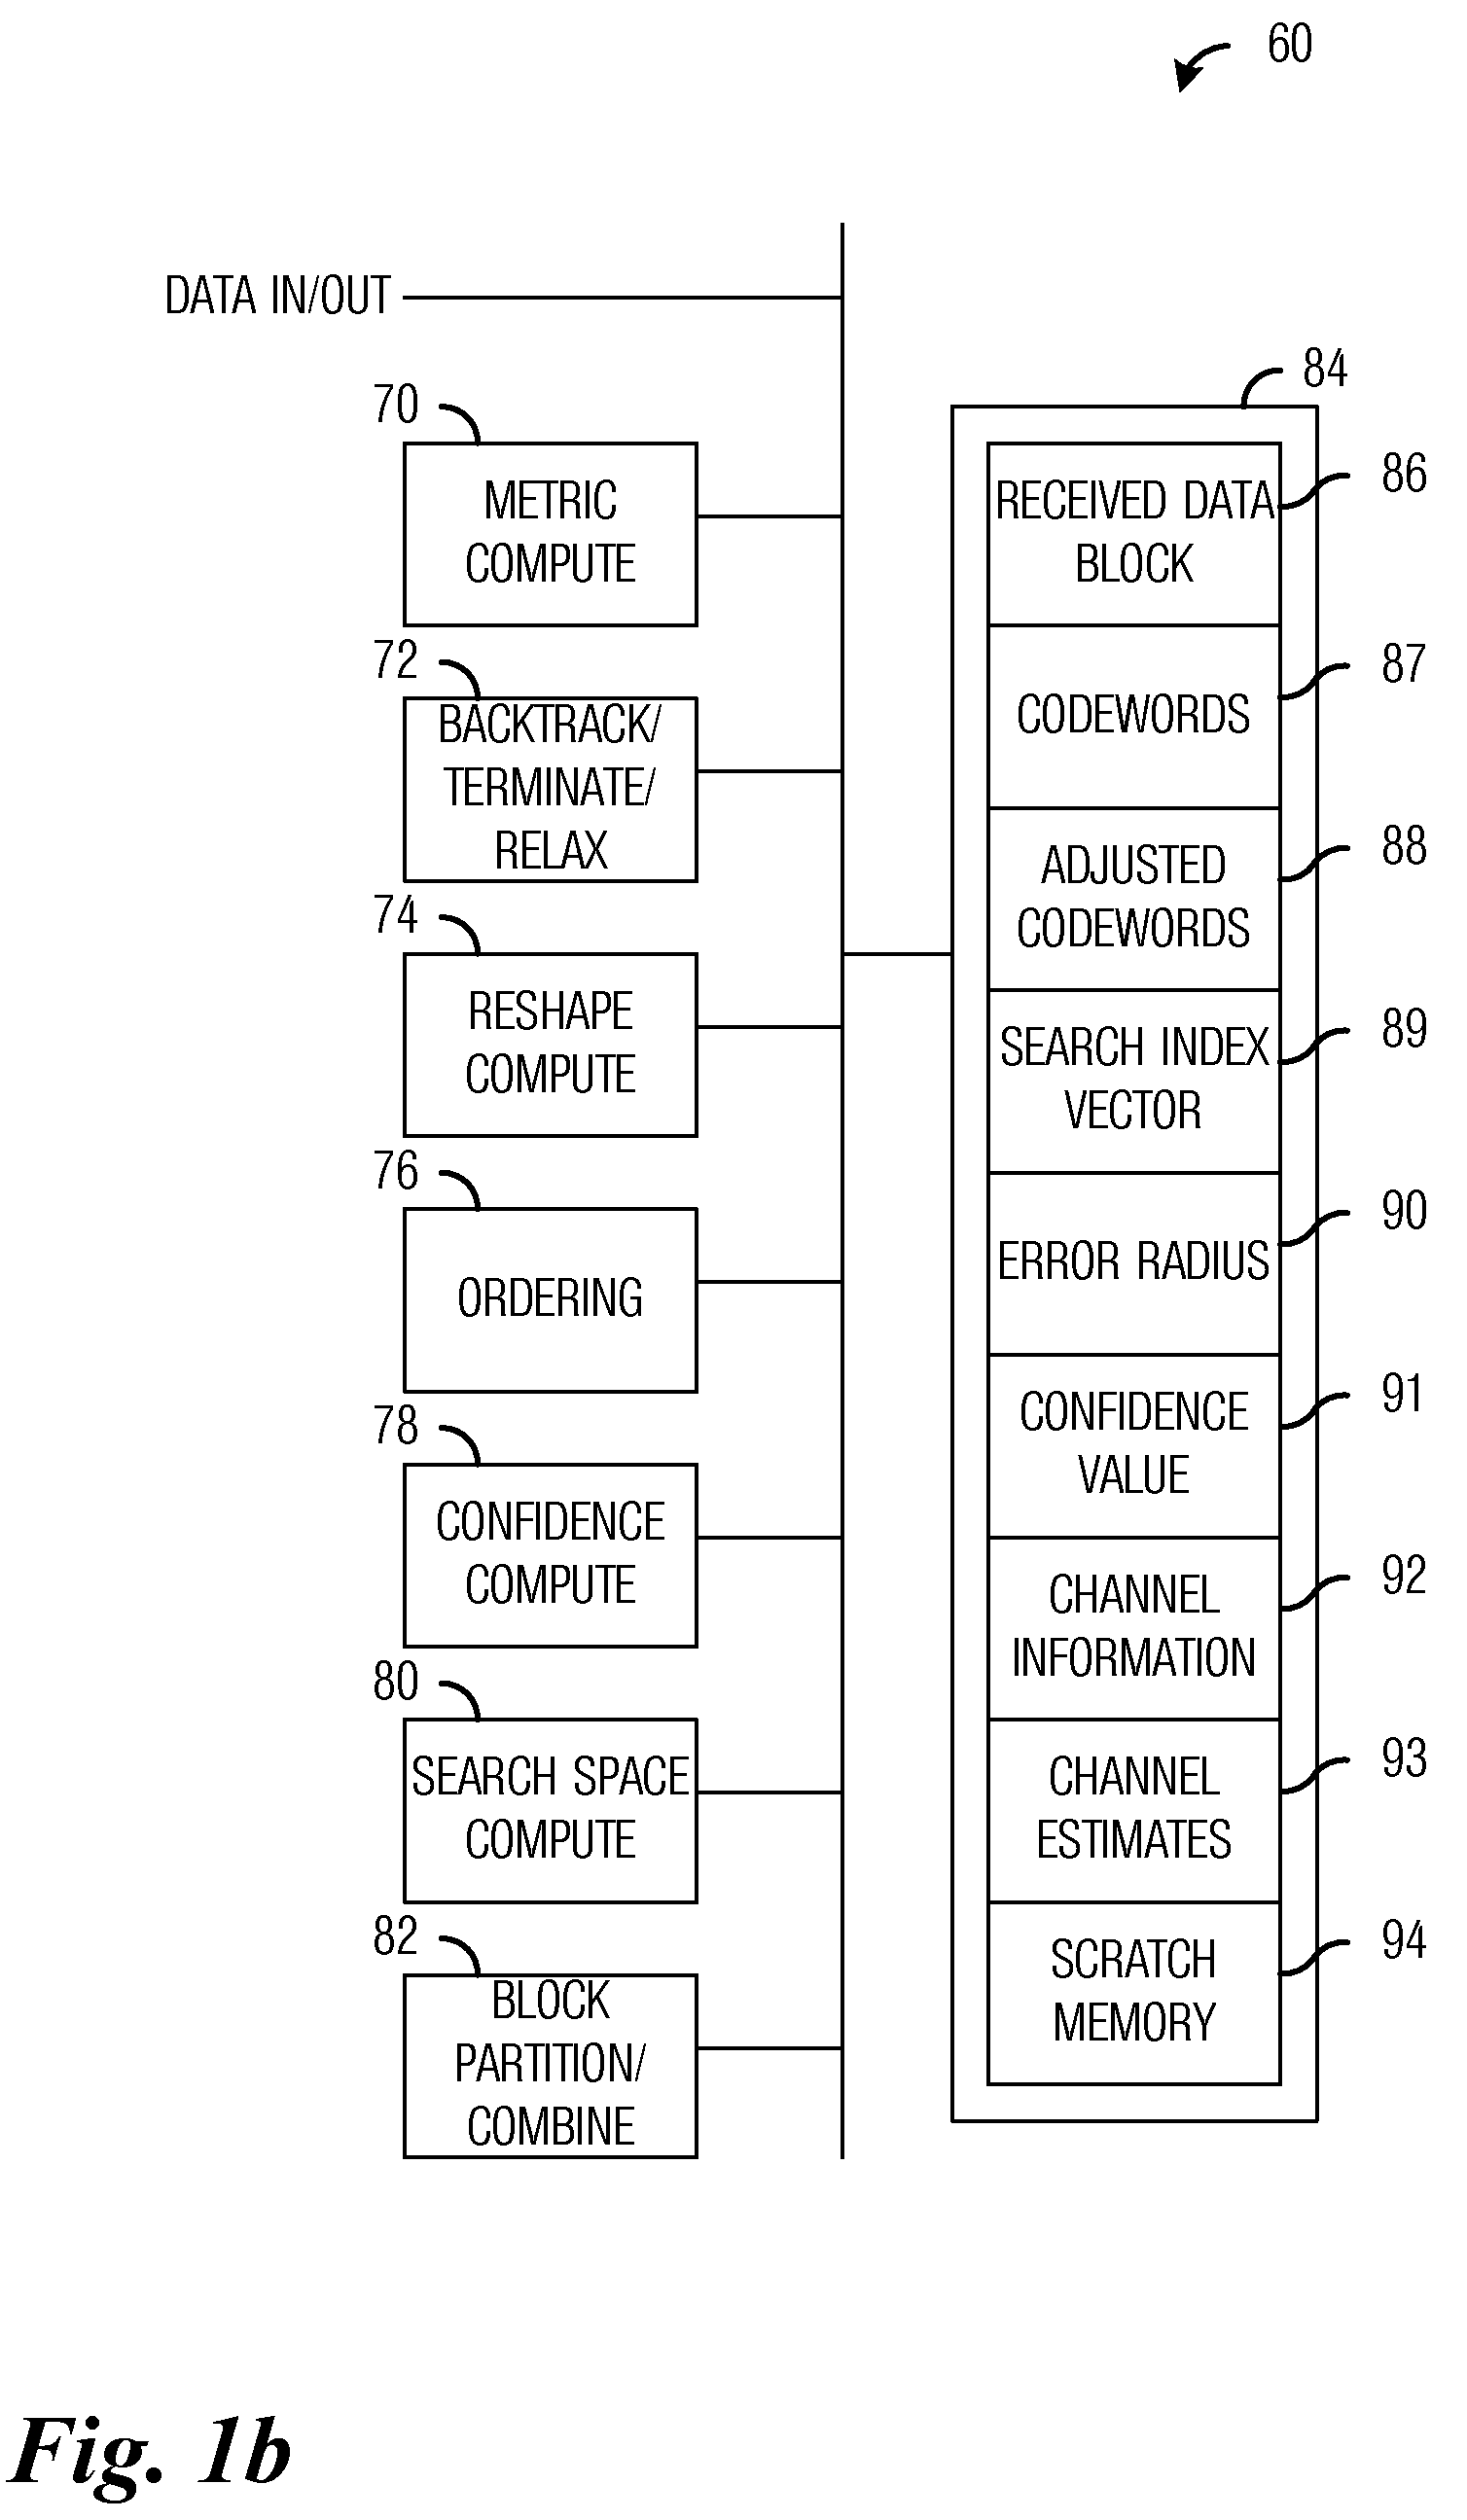 System and Method for Transmitter and Receiver Operation for Multiple-Input, Multiple-Output Communications Based on Prior Channel Knowledge